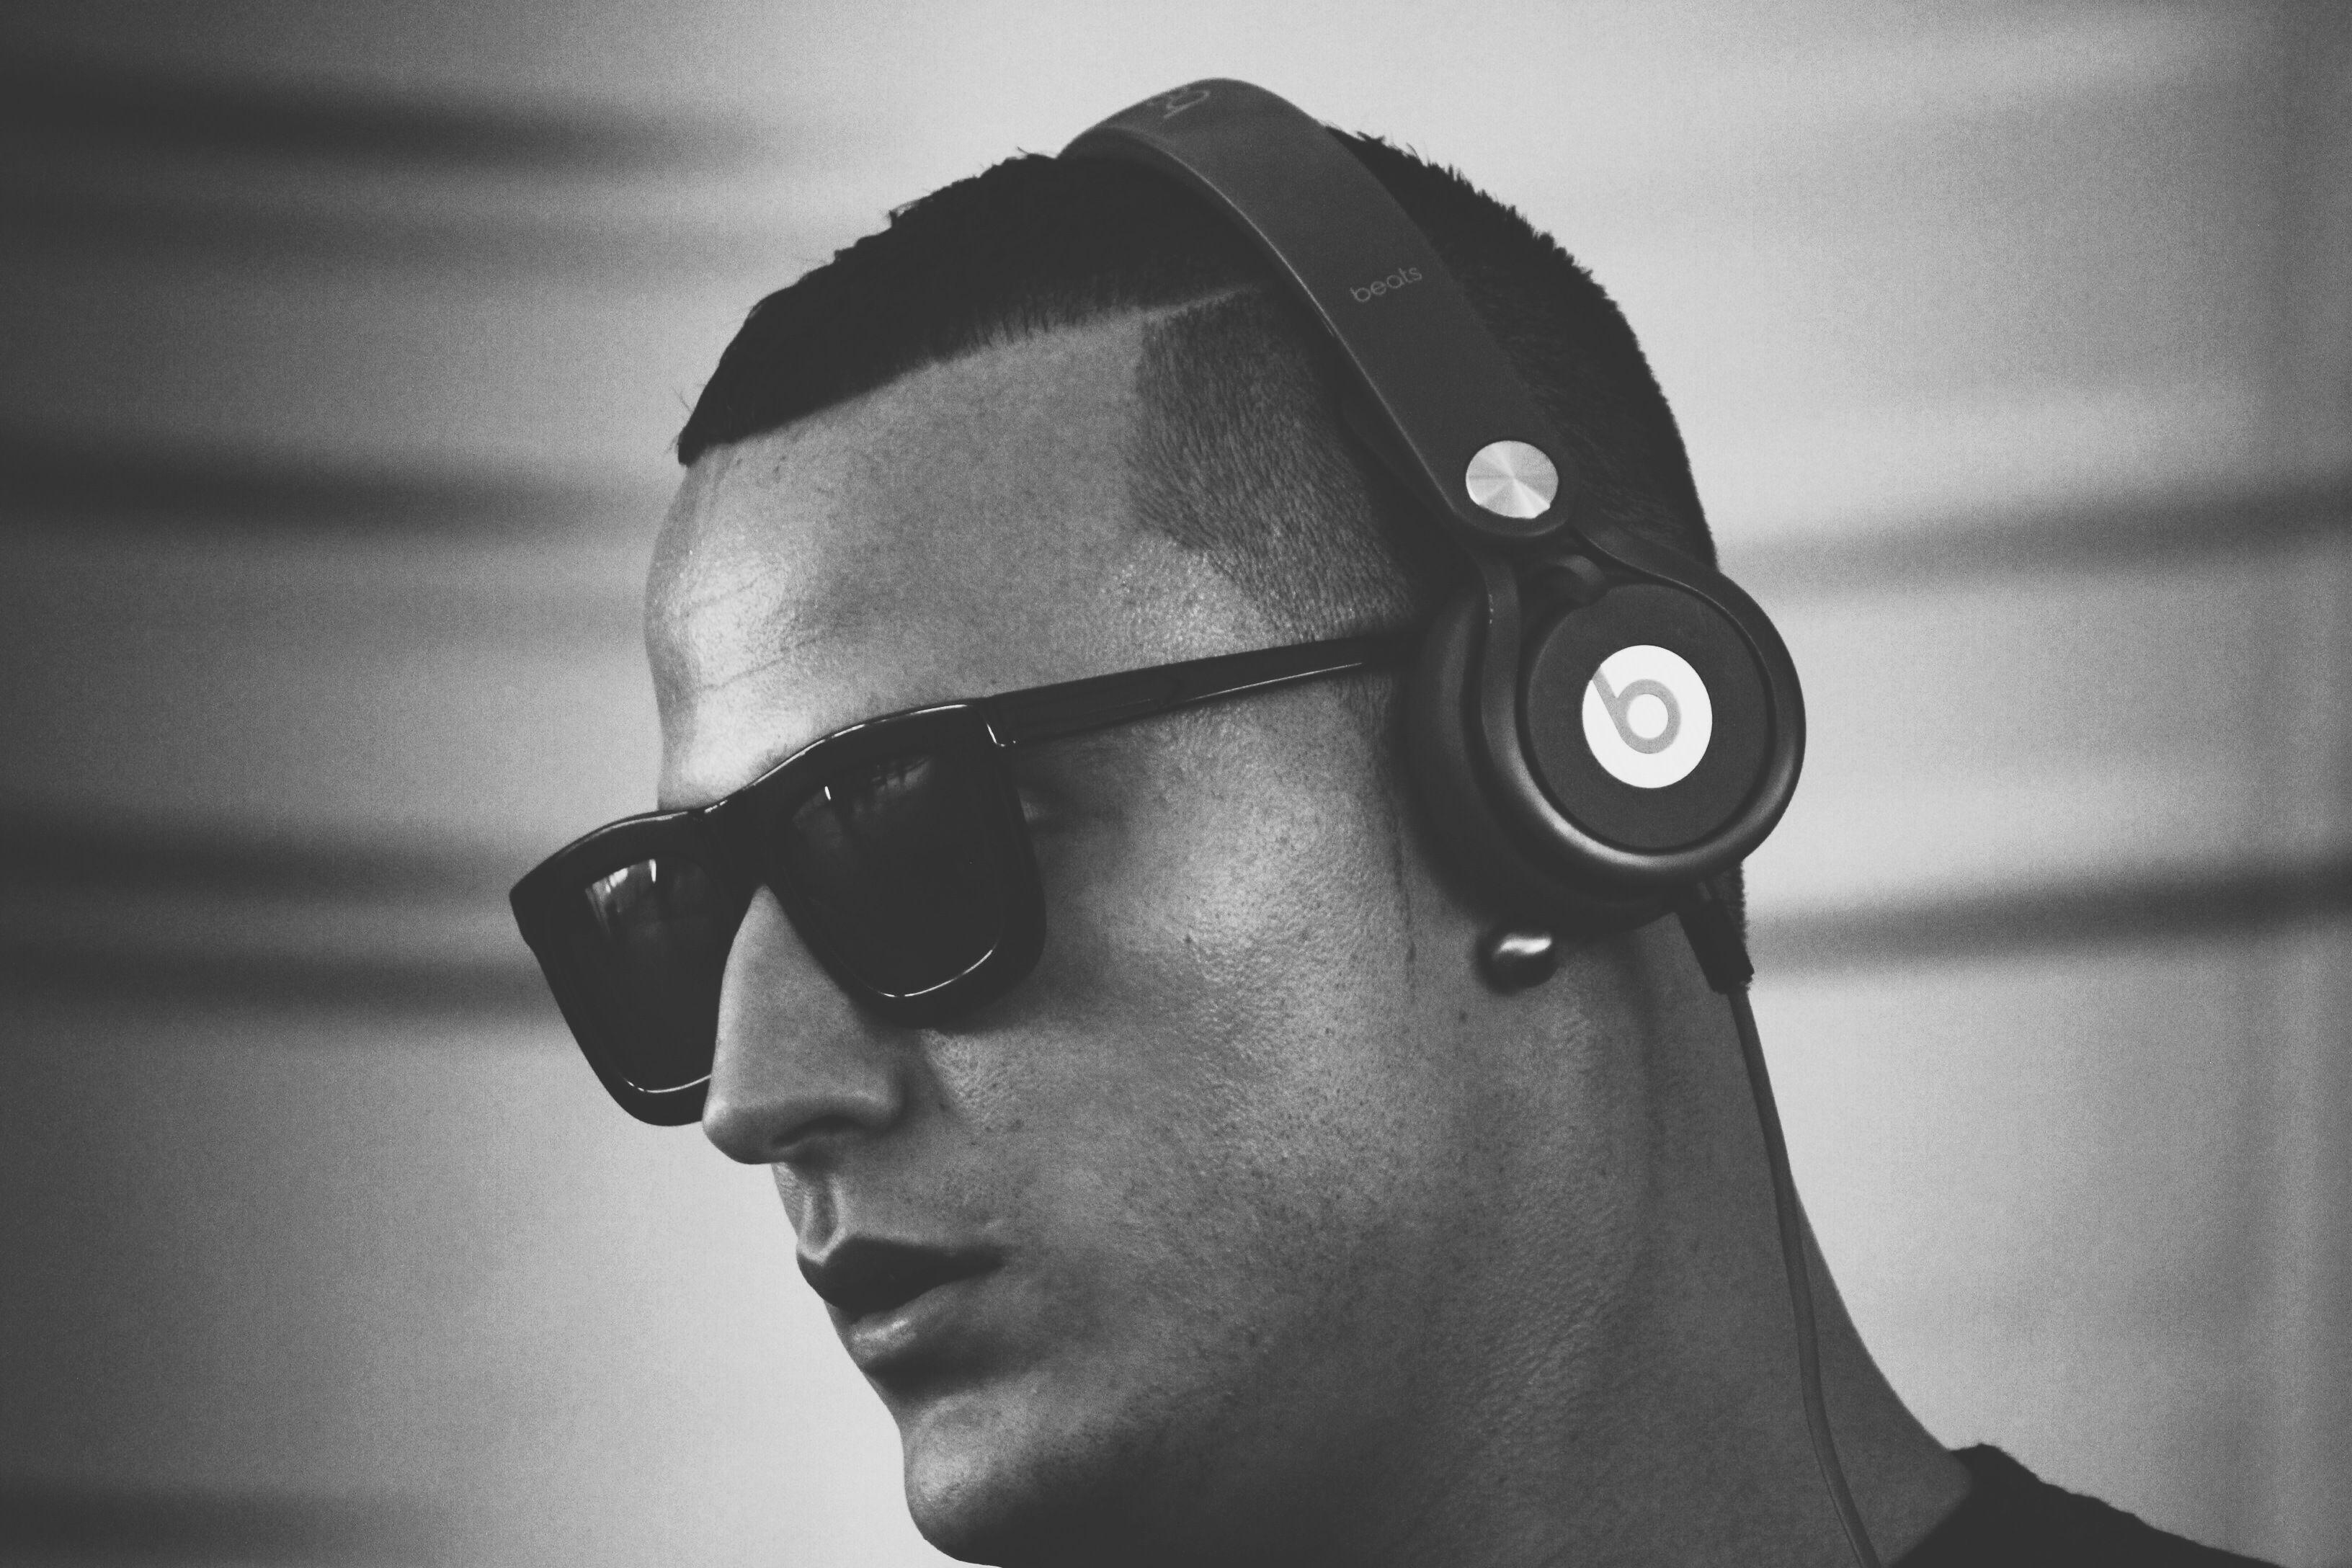 DJ Snake Wallpaper Image Photo Picture Background